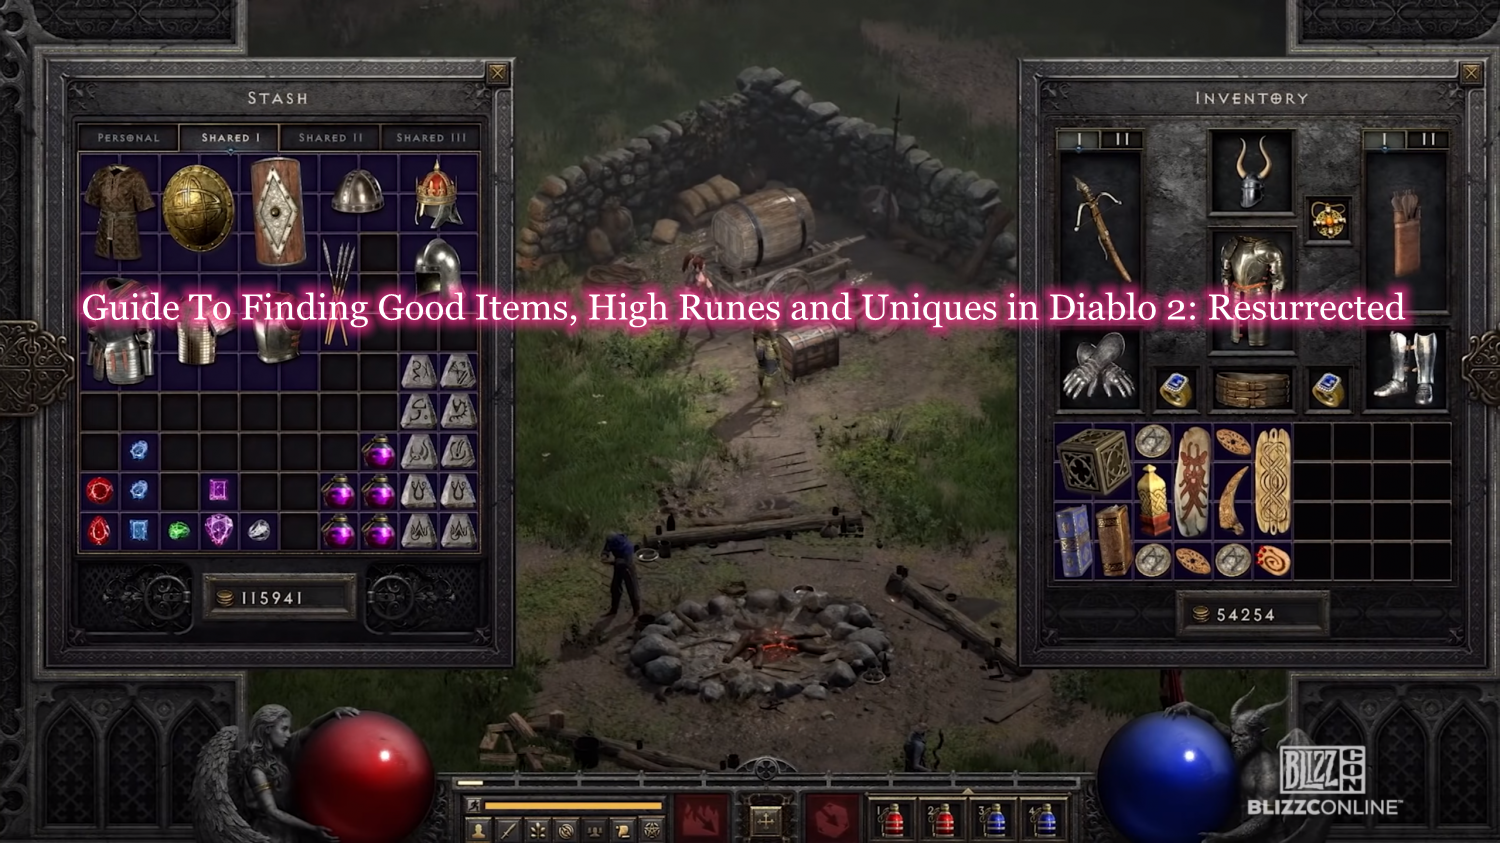 Guide To Finding Good Items, High Runes and Uniques in Diablo 2: Resurrected